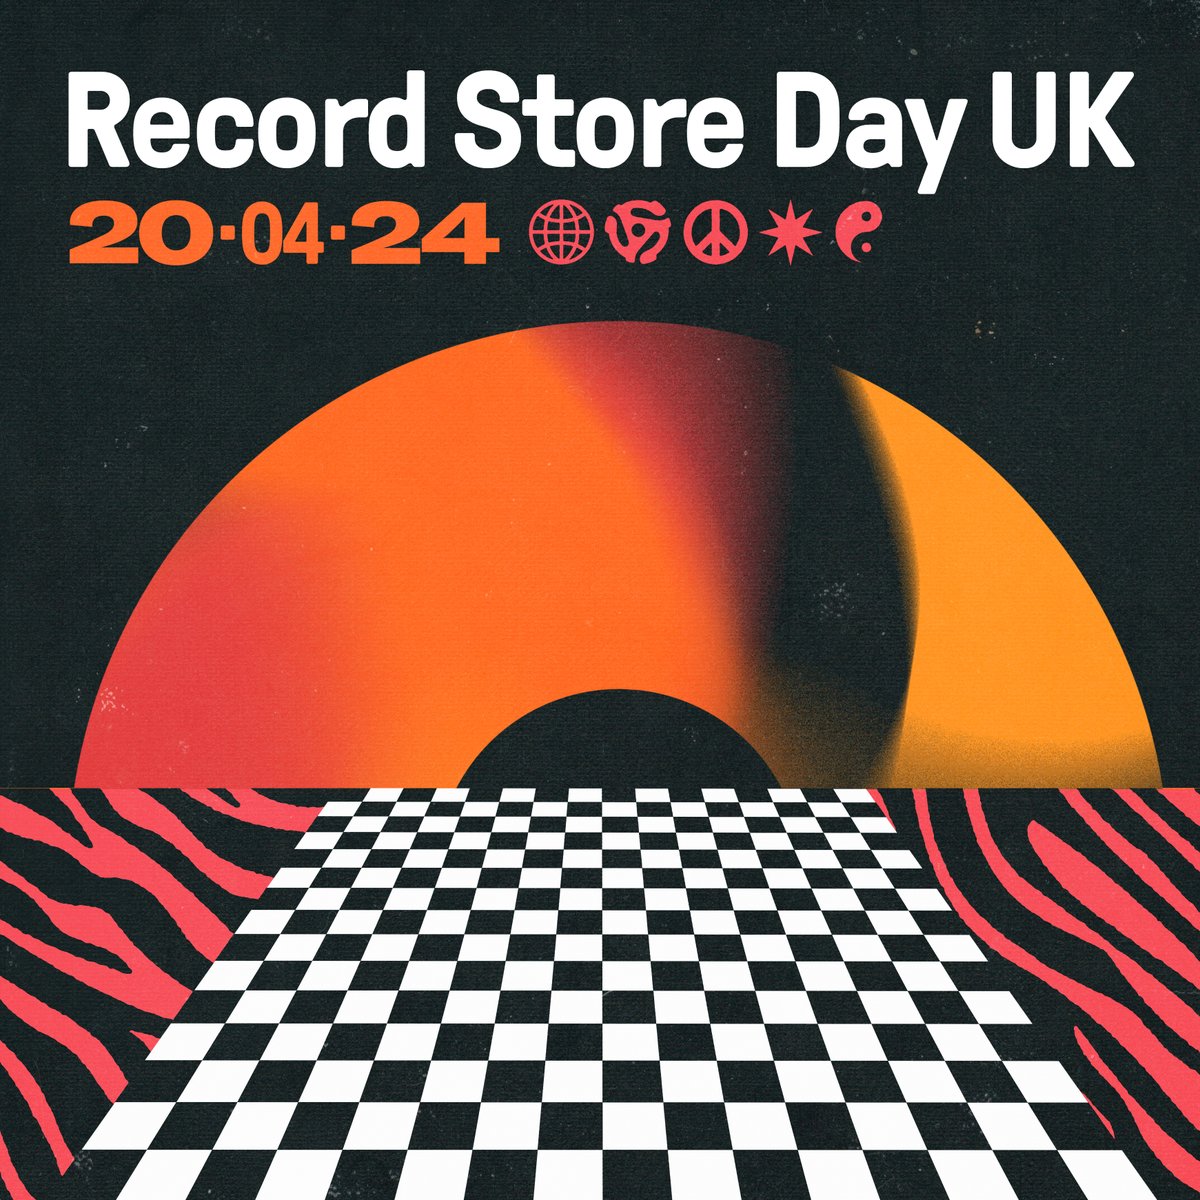 The day is finally here! Happy Record Store Day to all 🎉🥳 We hope you have an amazing day celebrating your local indie record shop! Let us know where you are #RSD24